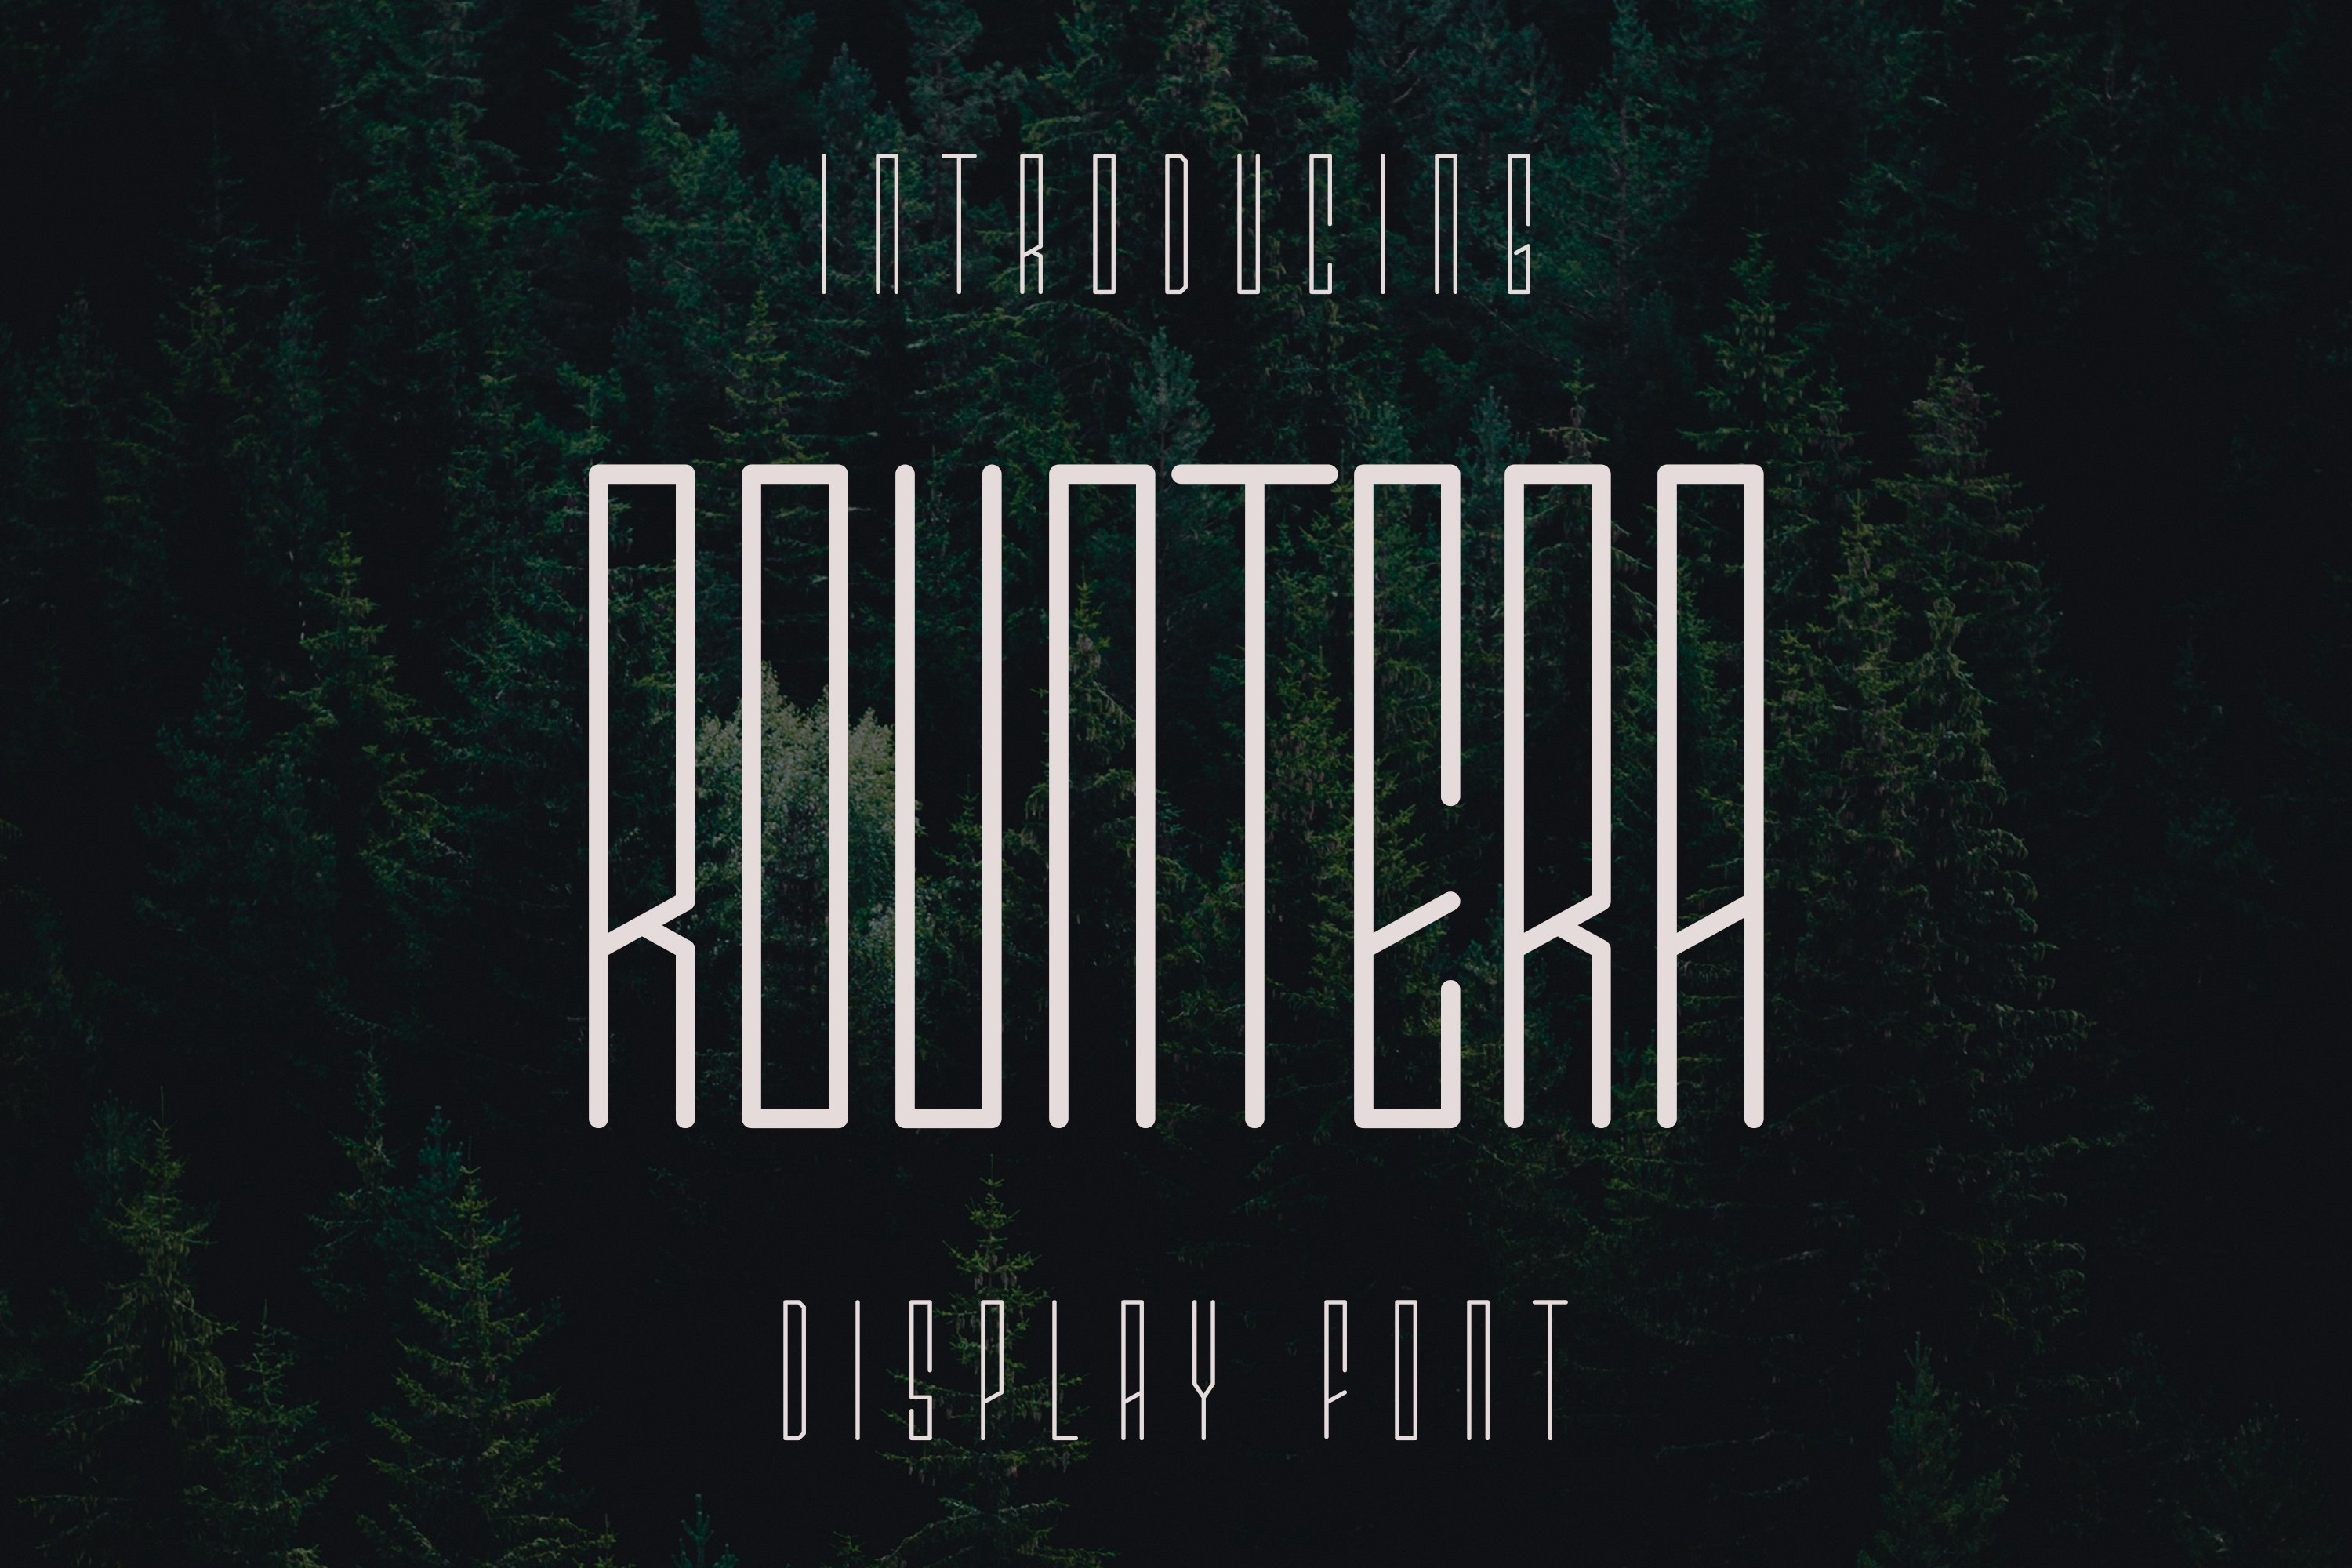 A font that is in the middle of a forest.